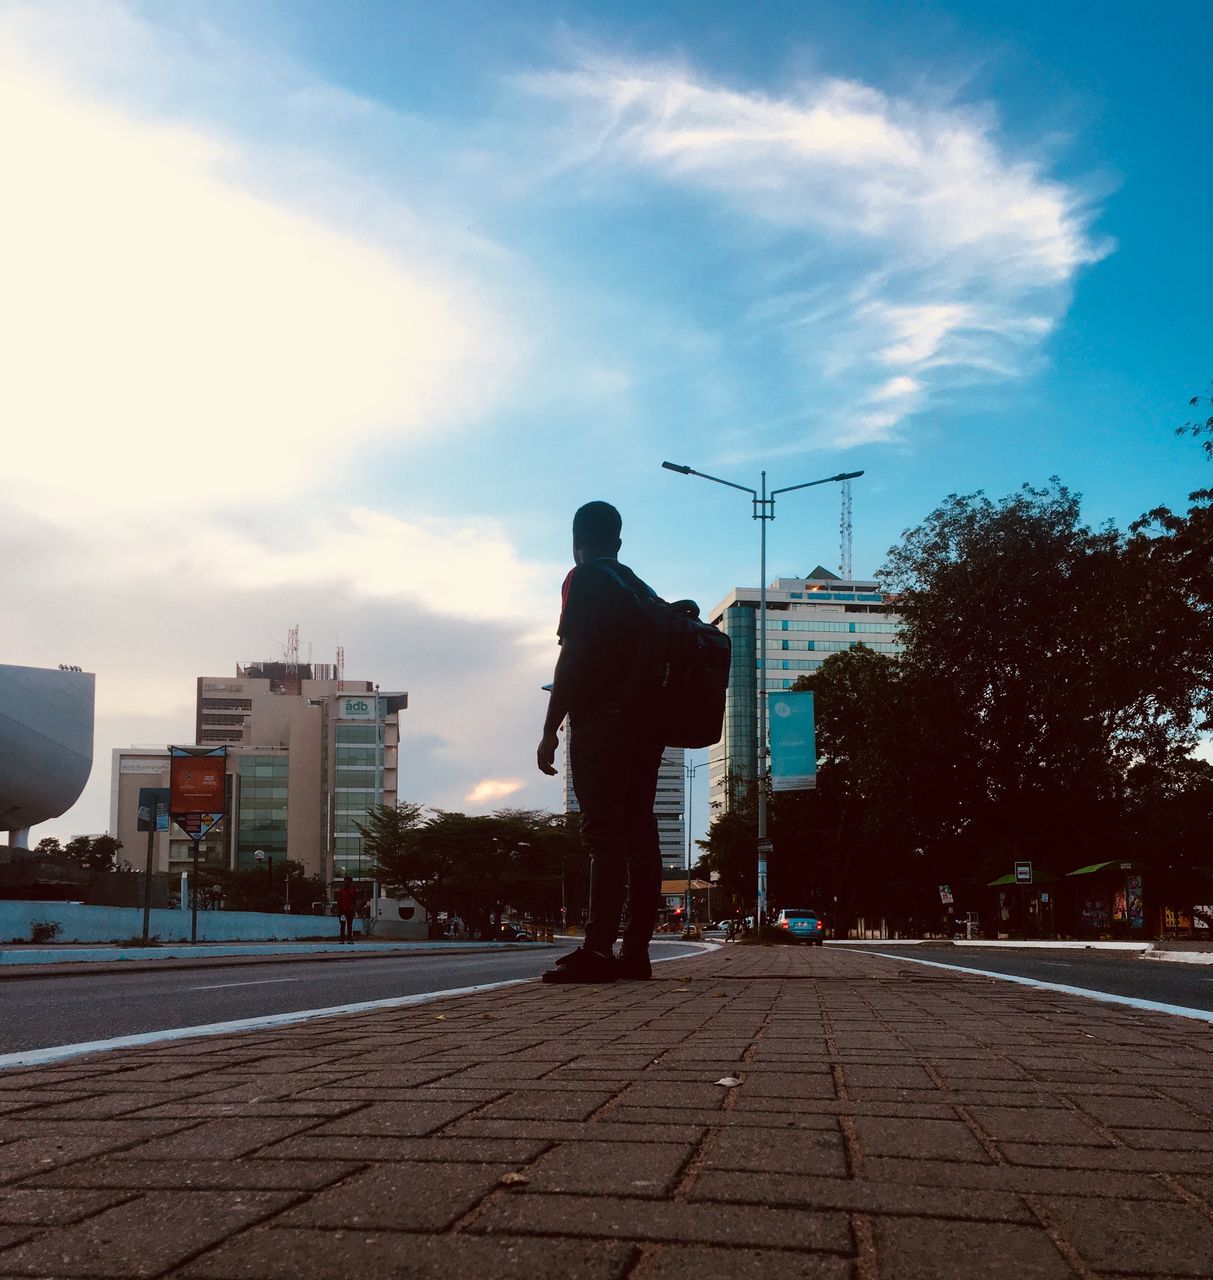 sky, one person, real people, building exterior, architecture, lifestyles, full length, men, city, built structure, leisure activity, street, rear view, nature, cloud - sky, footpath, standing, outdoors, sunlight